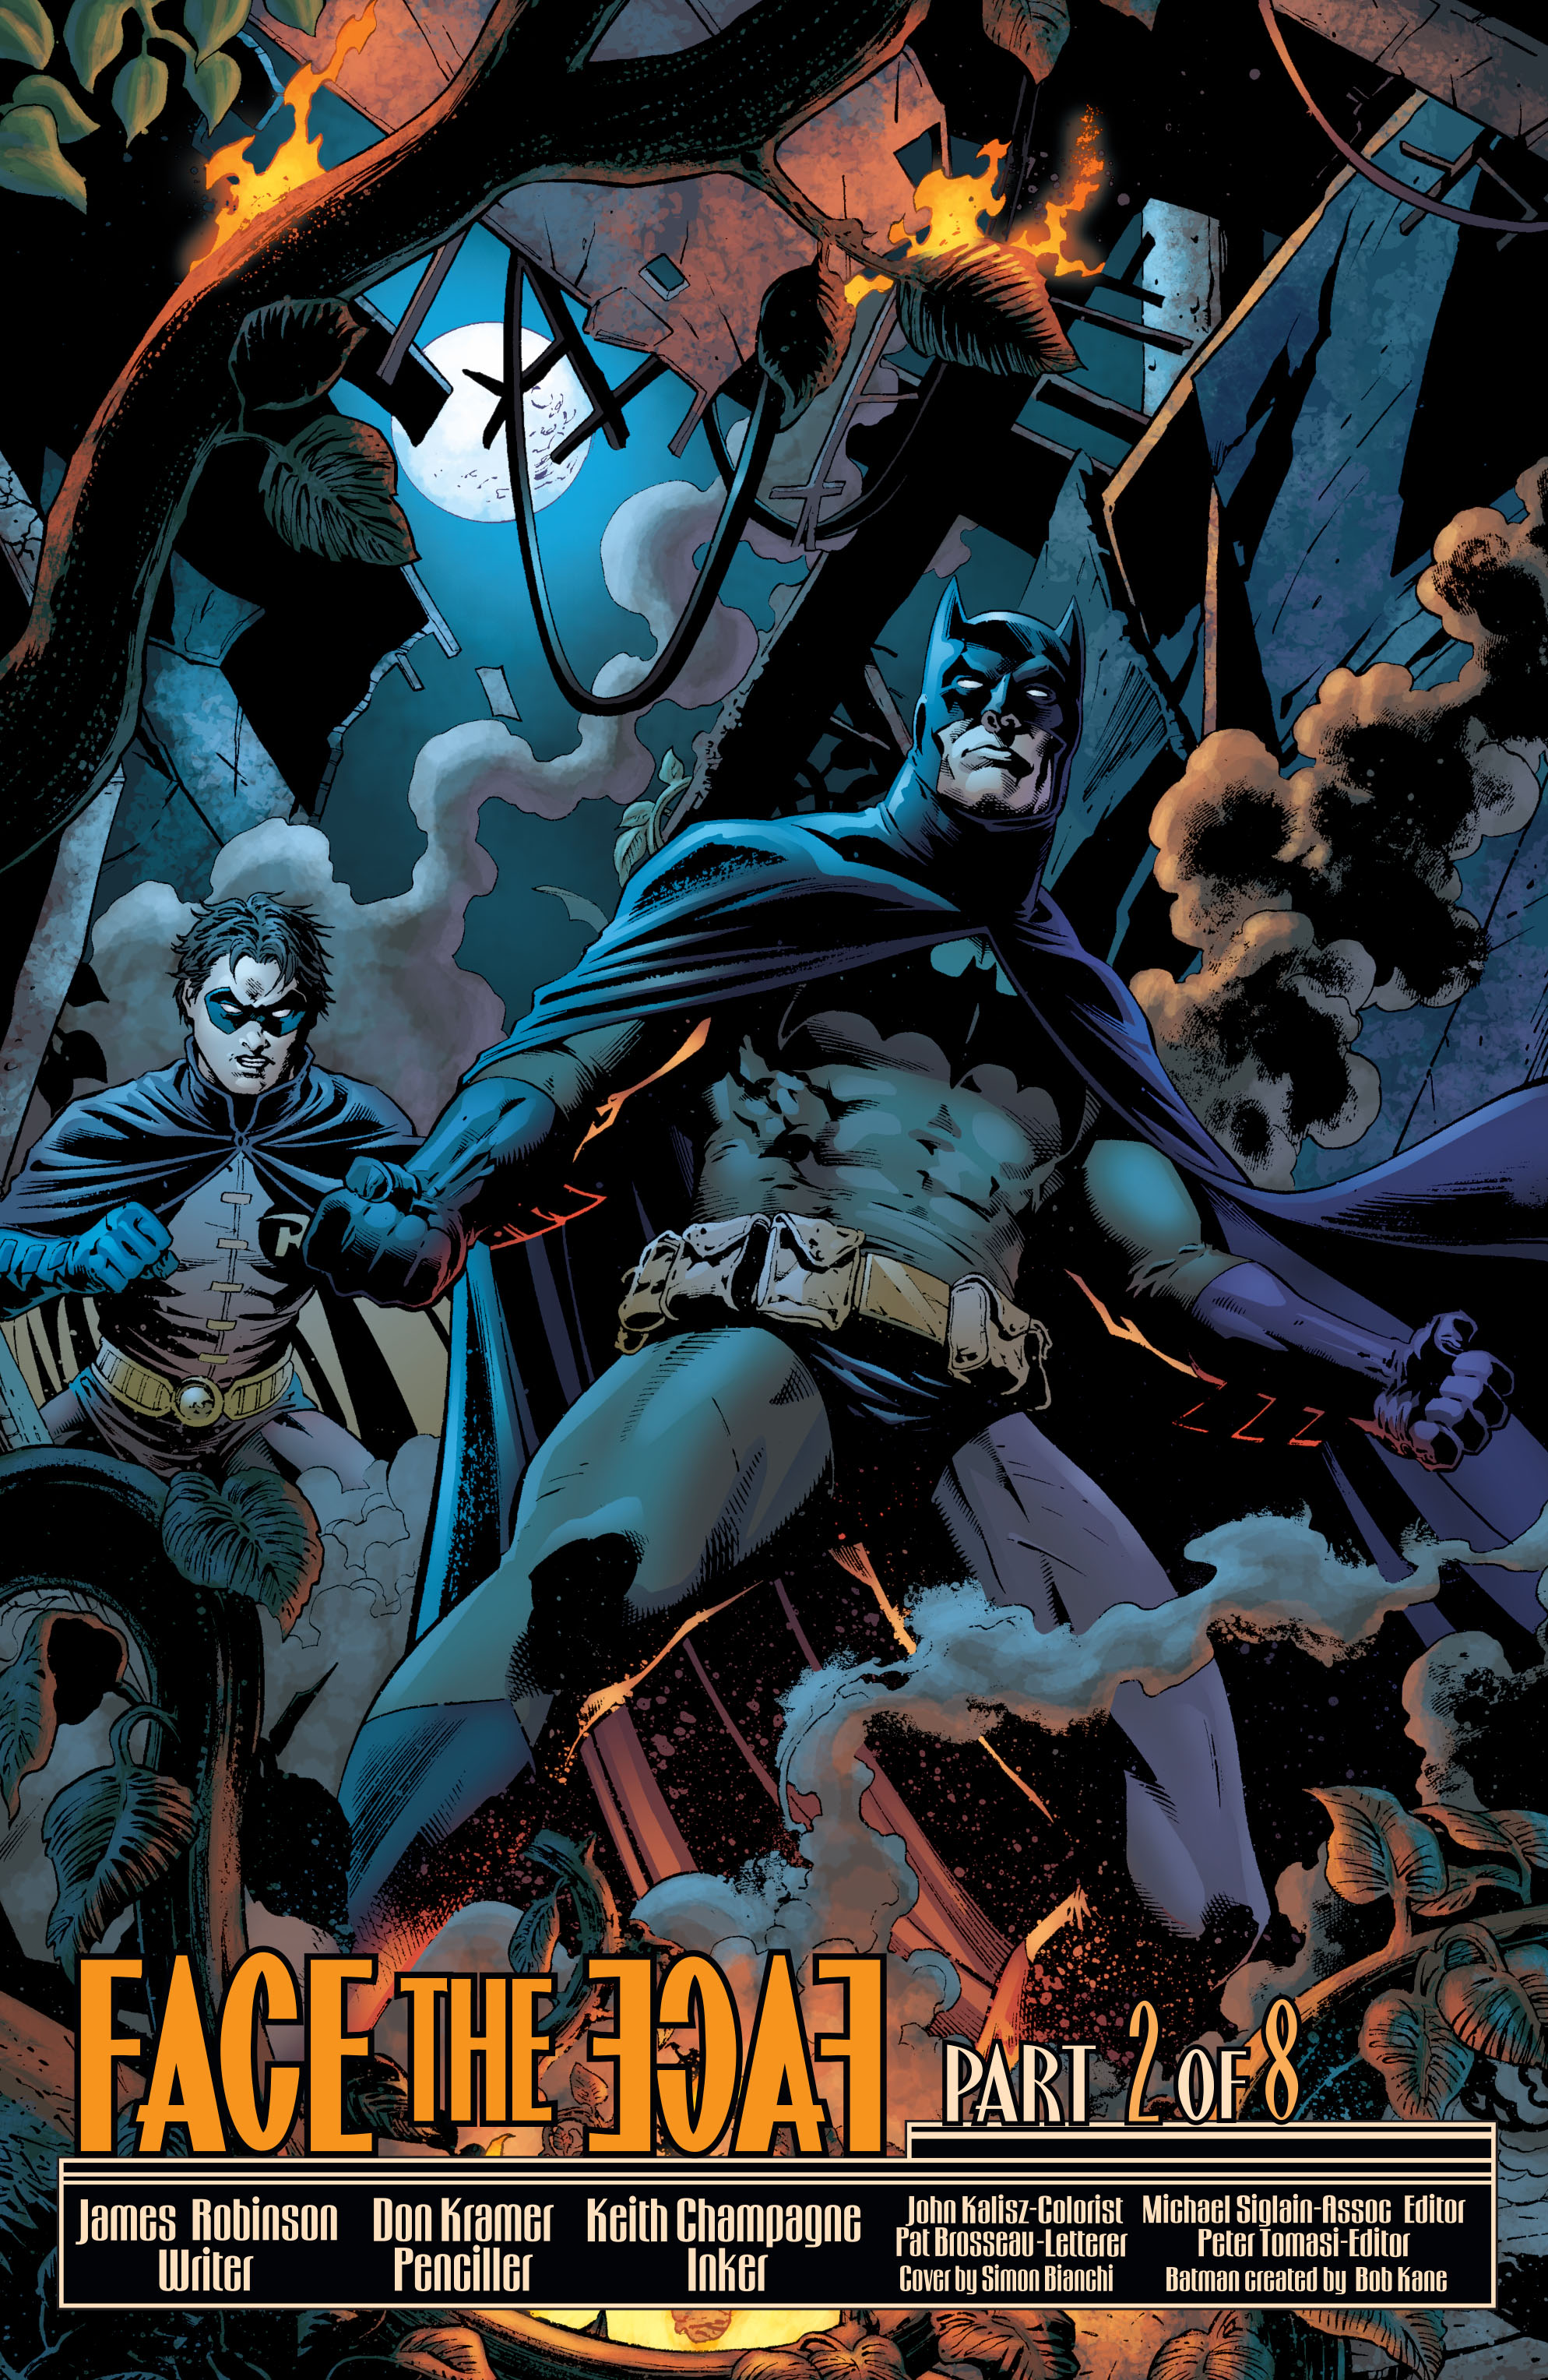 Batman 1940 Issue 651 | Read Batman 1940 Issue 651 comic online in high  quality. Read Full Comic online for free - Read comics online in high  quality .|